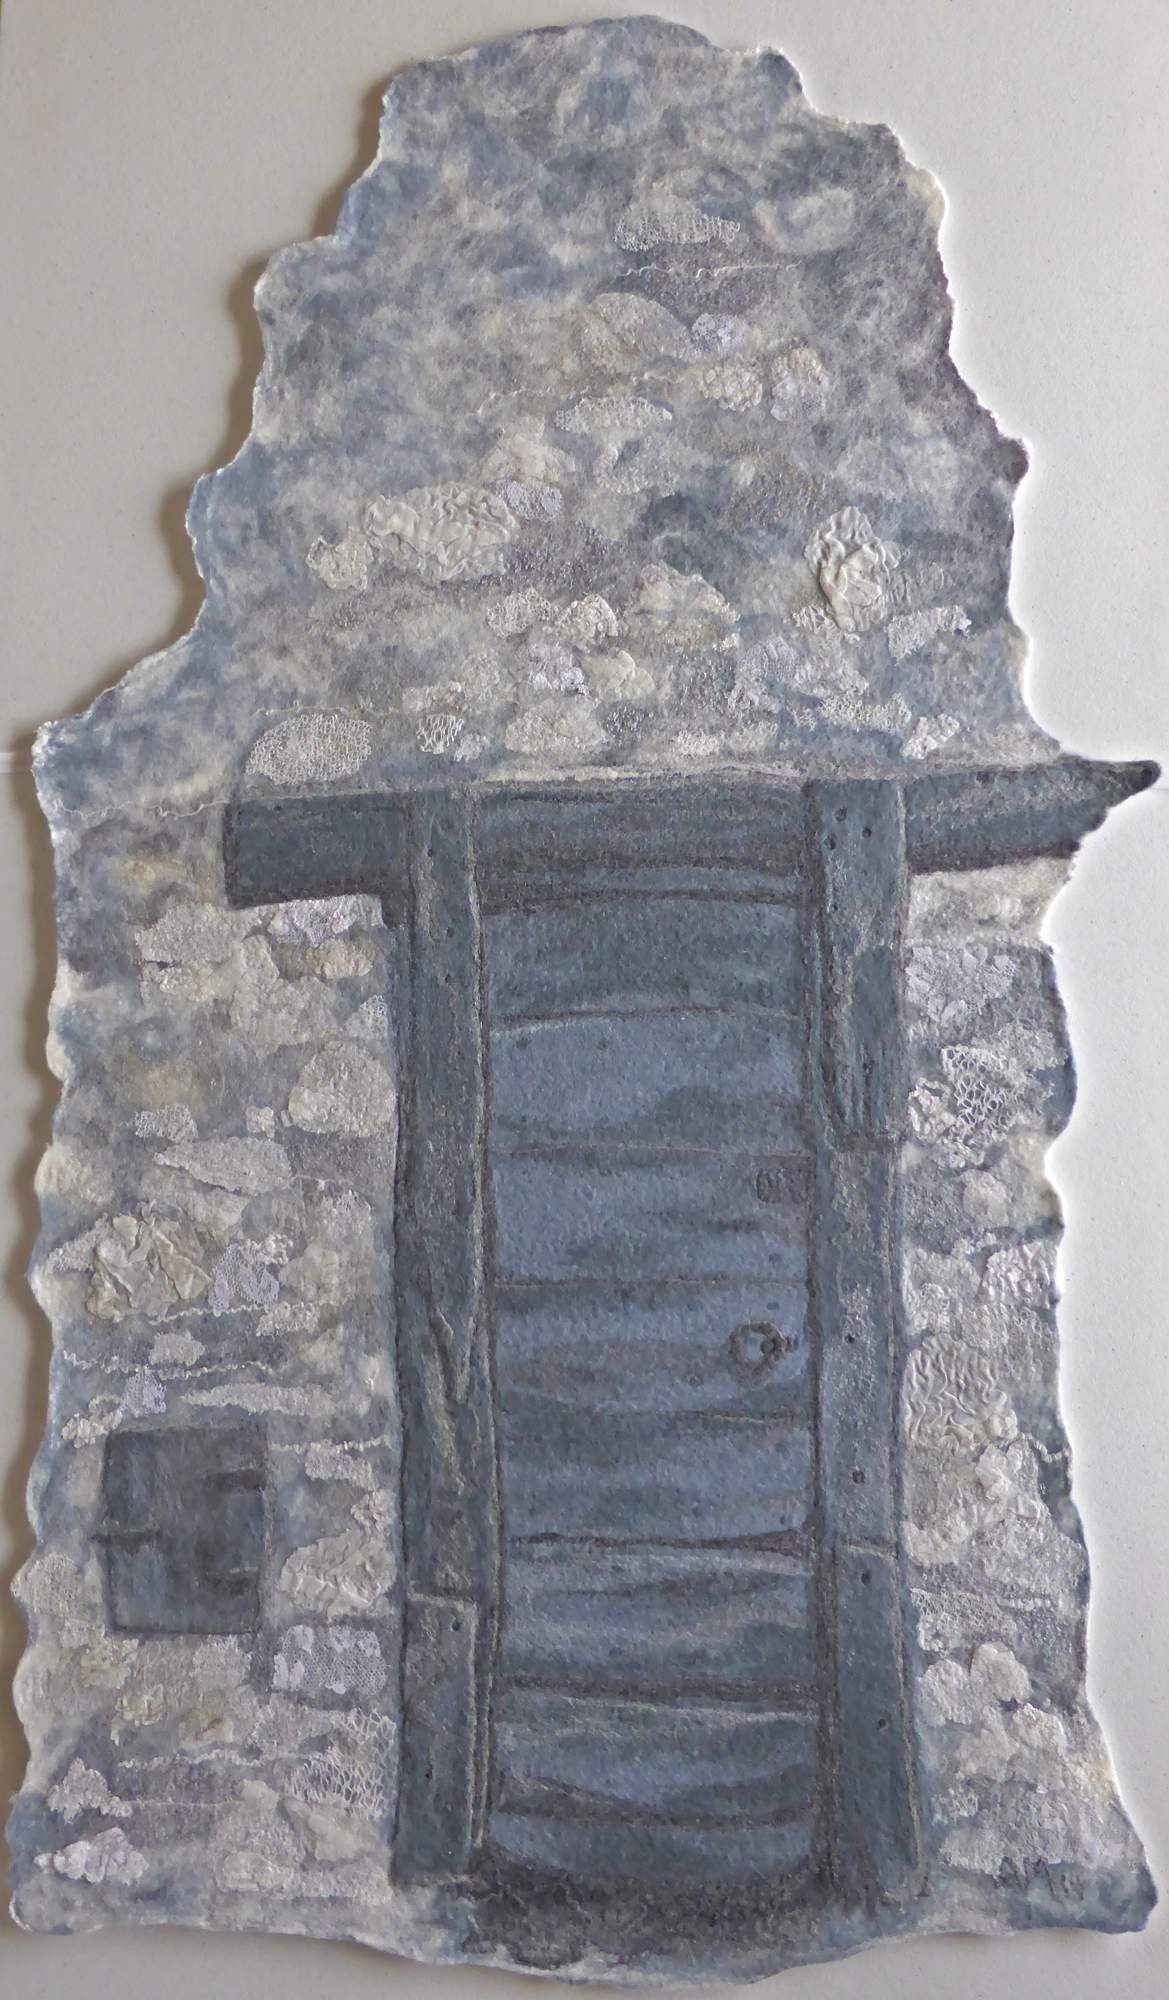 'Weathered Wood in Rock' Felt Wall Hanging by Andrea McCallum